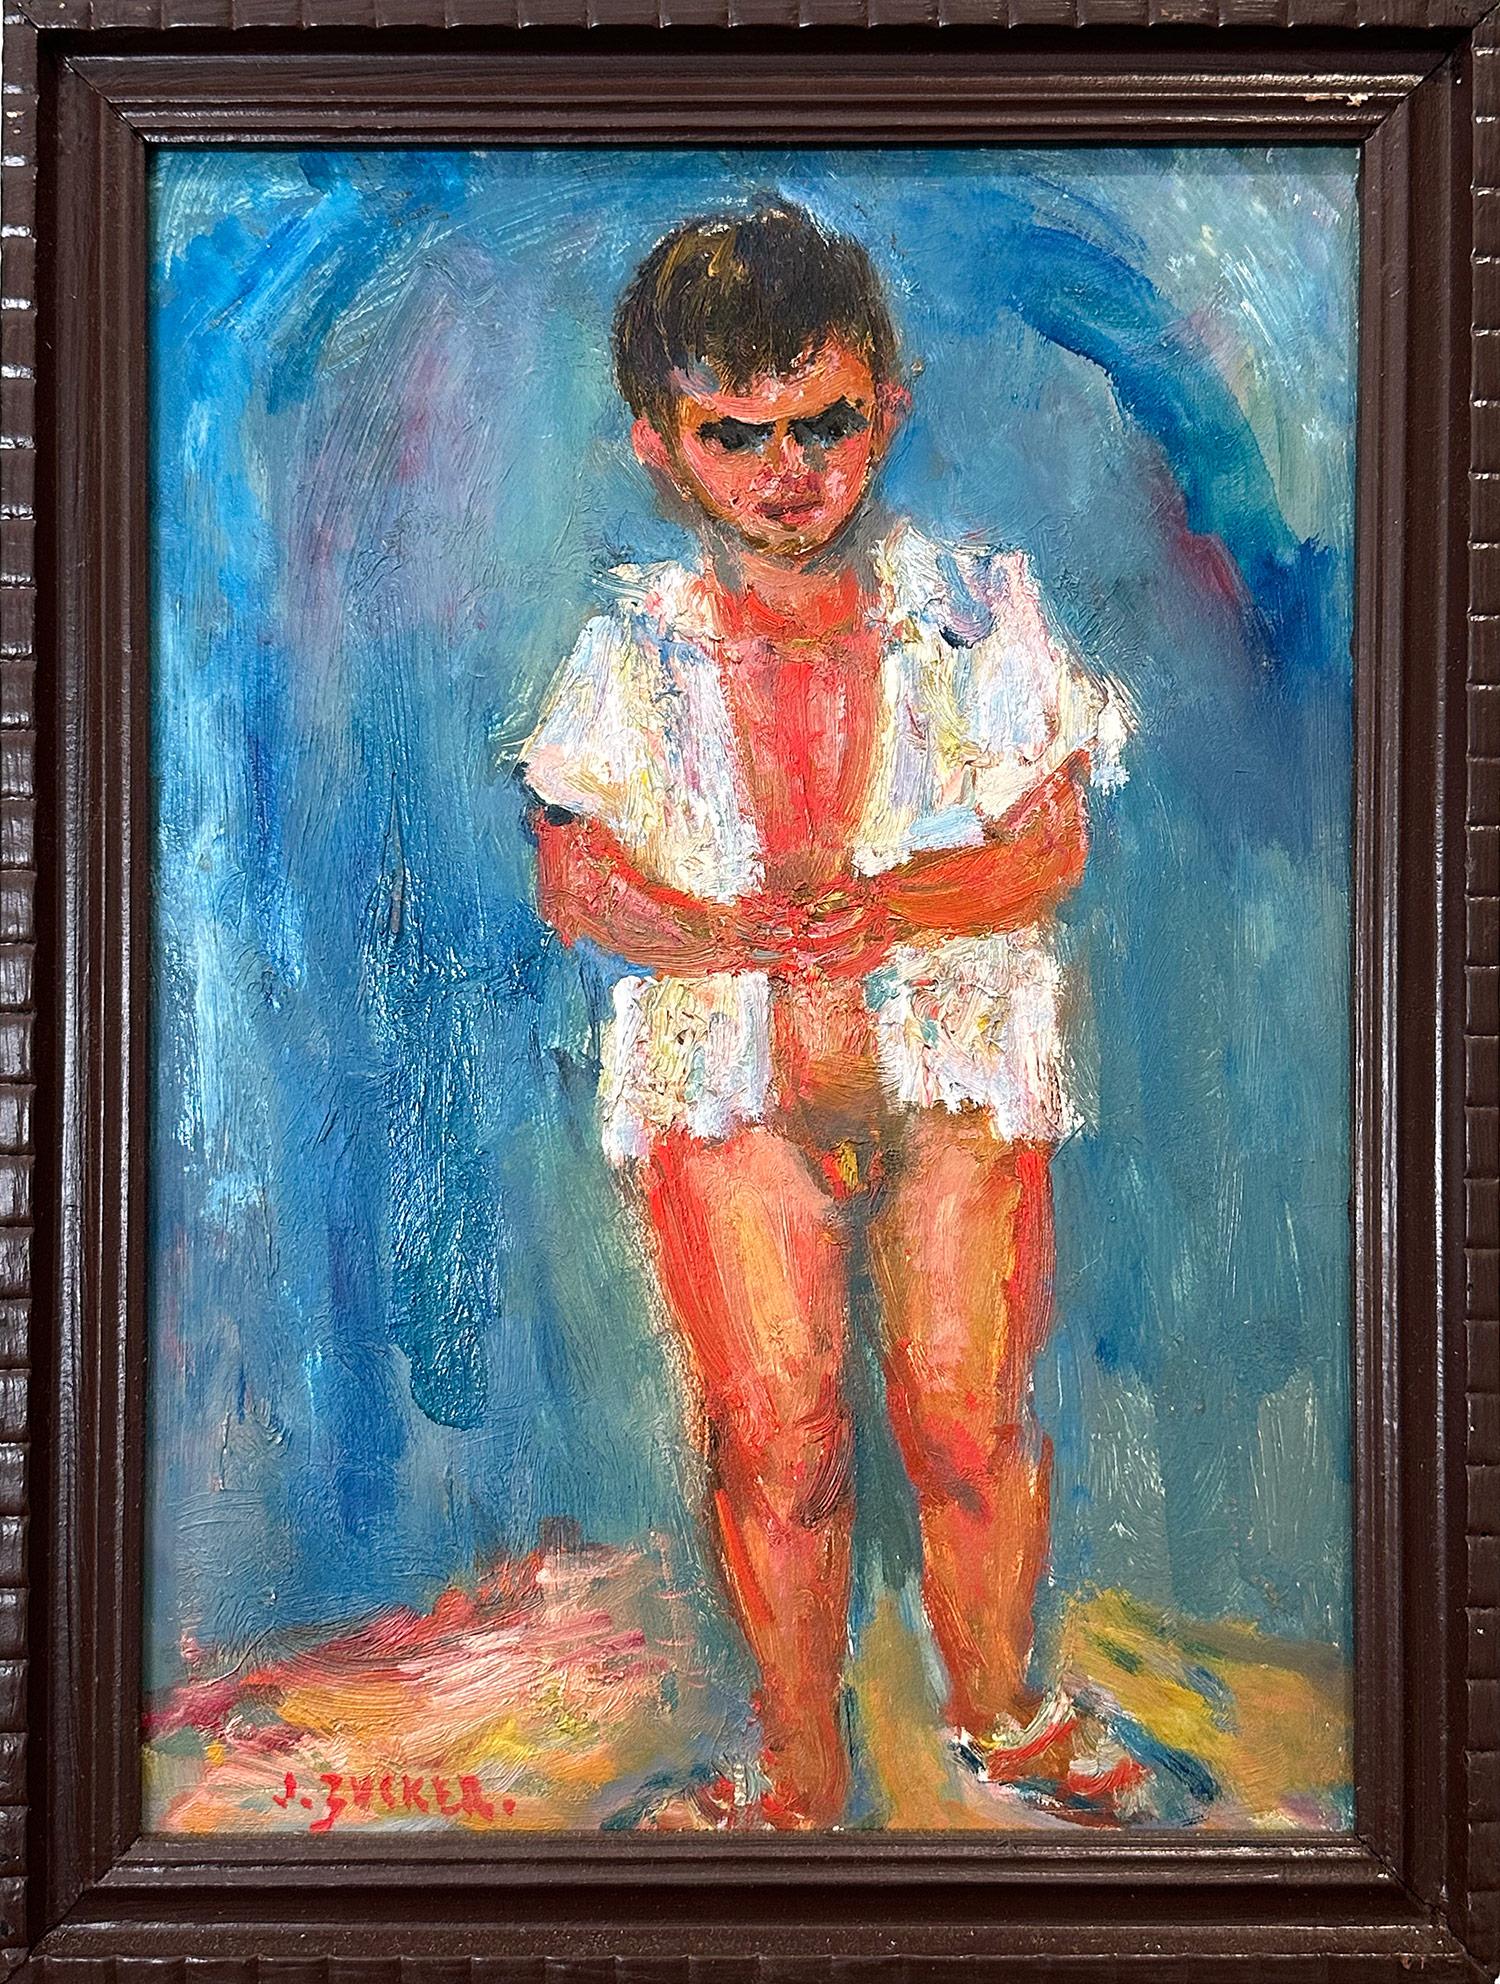 Jacques Zucker Figurative Painting - "Nude Boy with Open Shirt" French Blue Post-Impressionist Oil Painting Framed